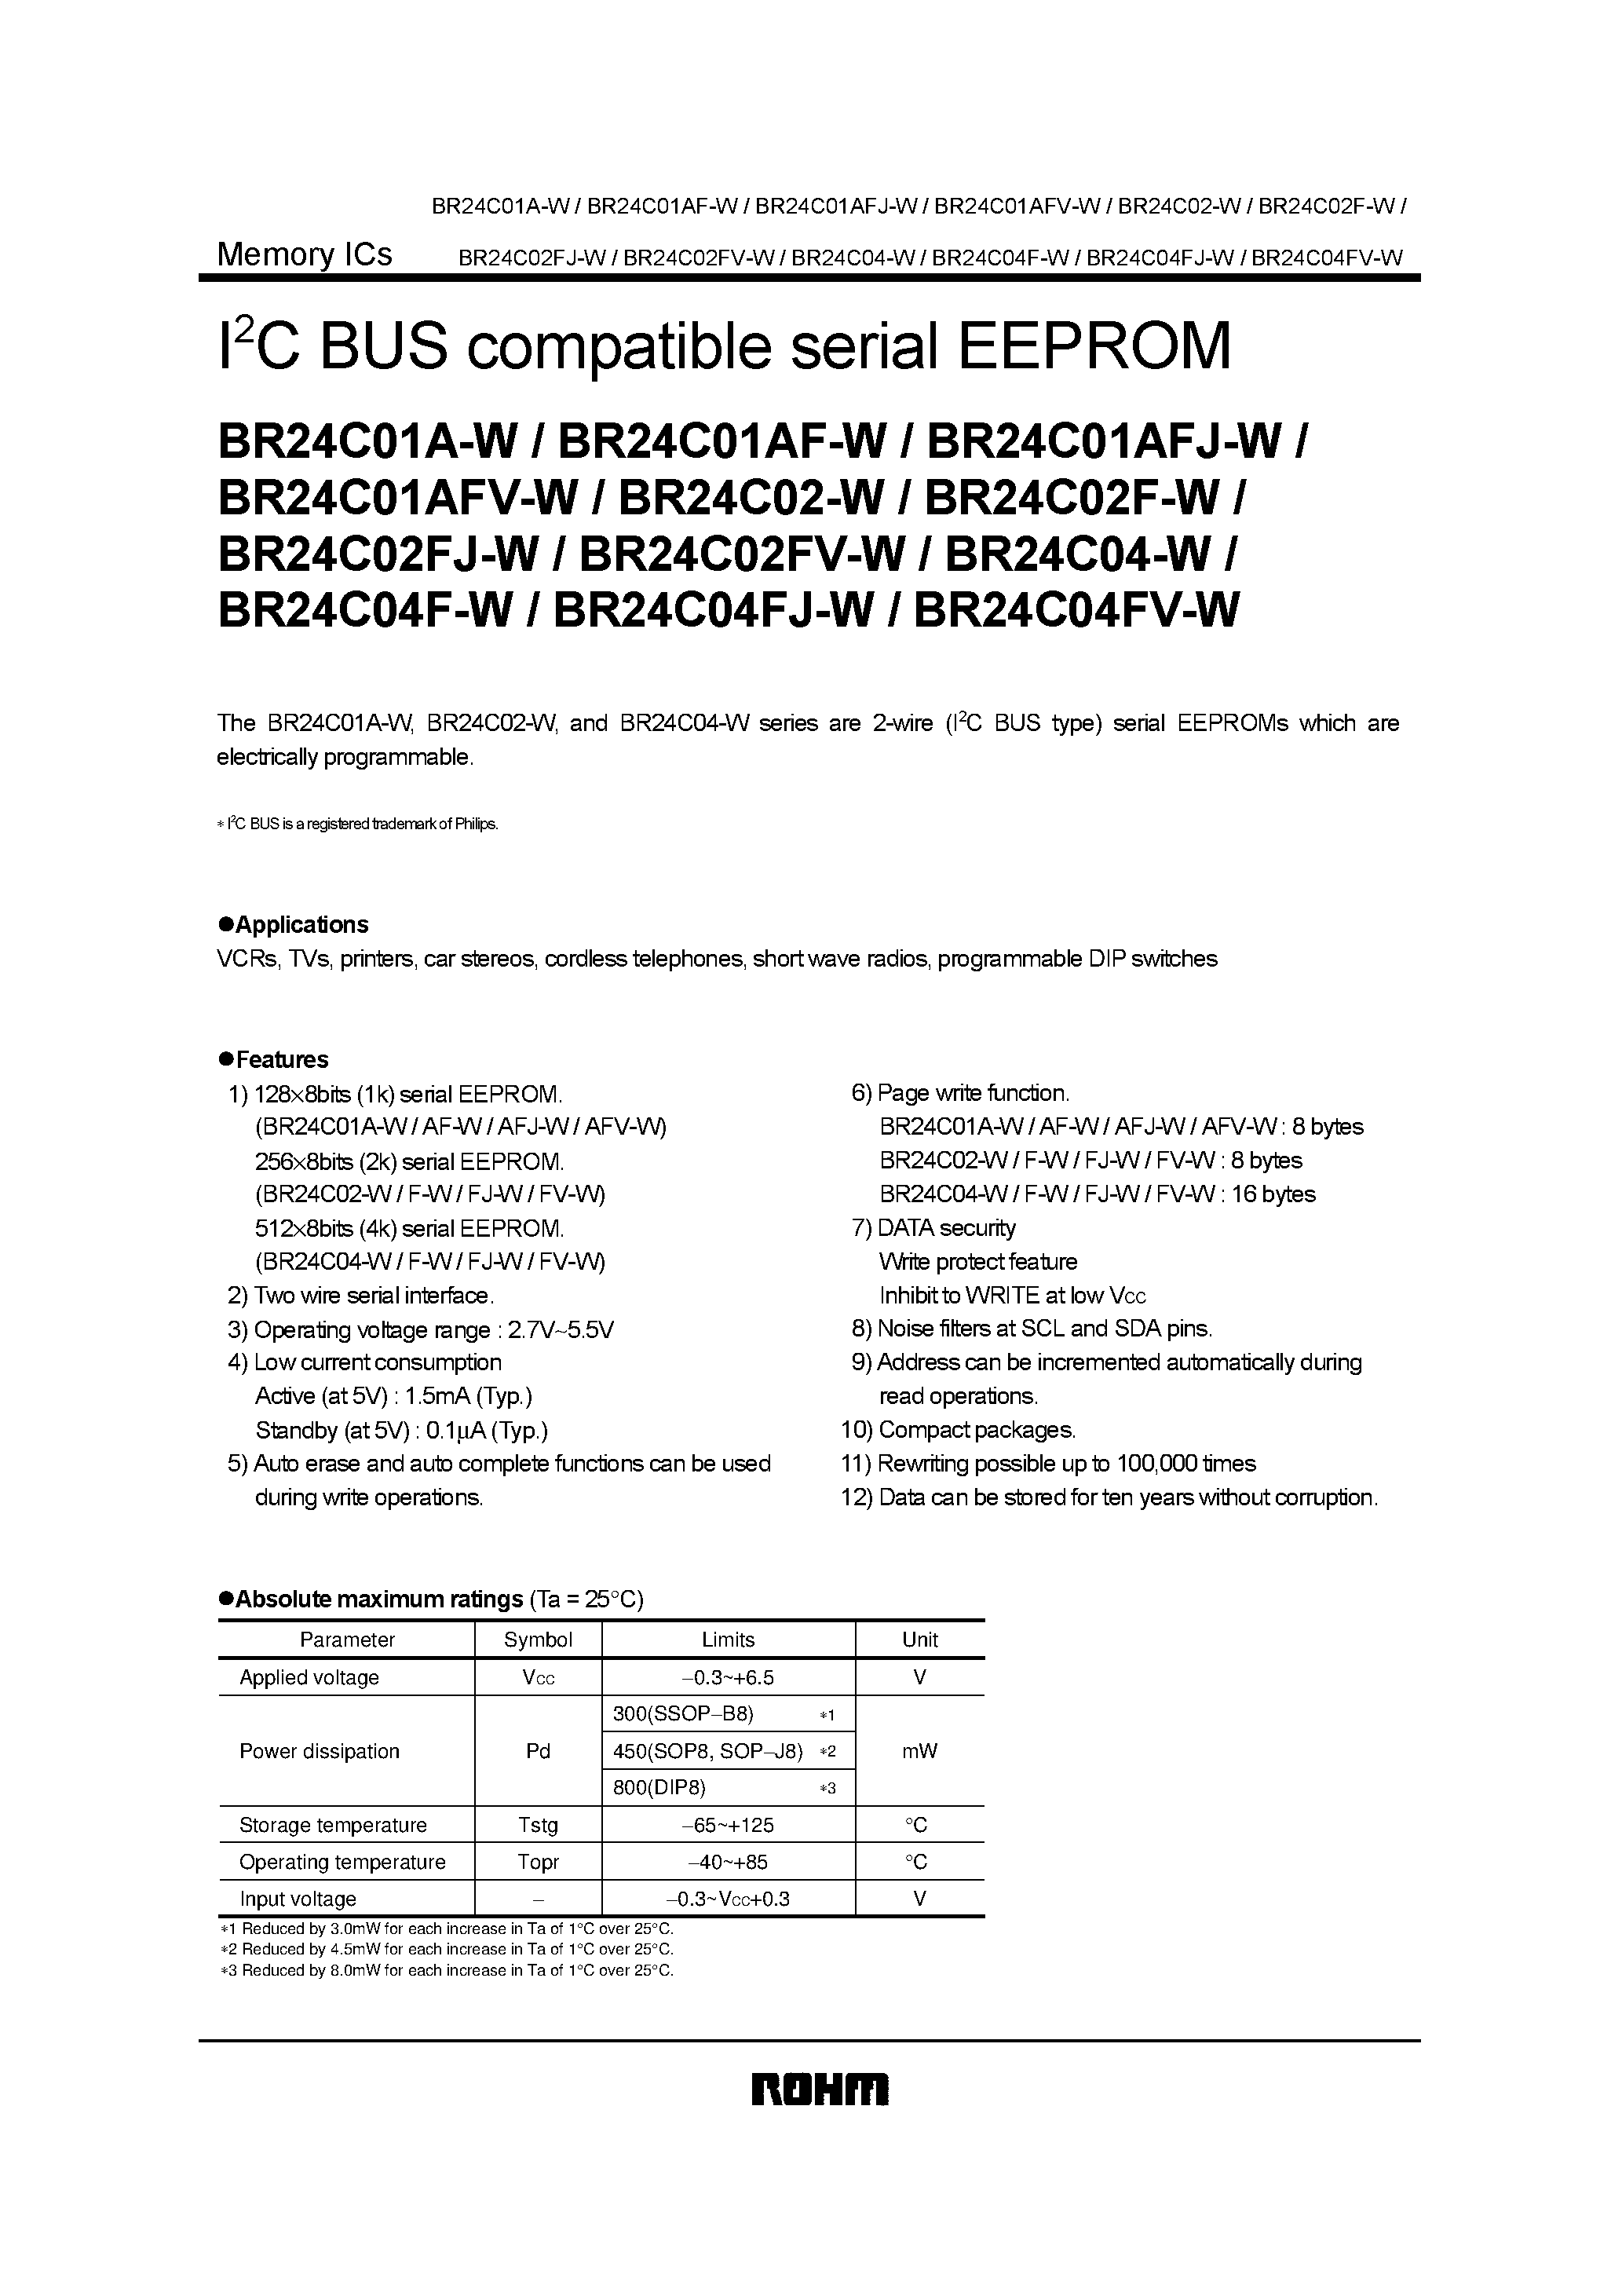 Datasheet BR24C02FV-W - I2C BUS compatible serial EEPROM page 1